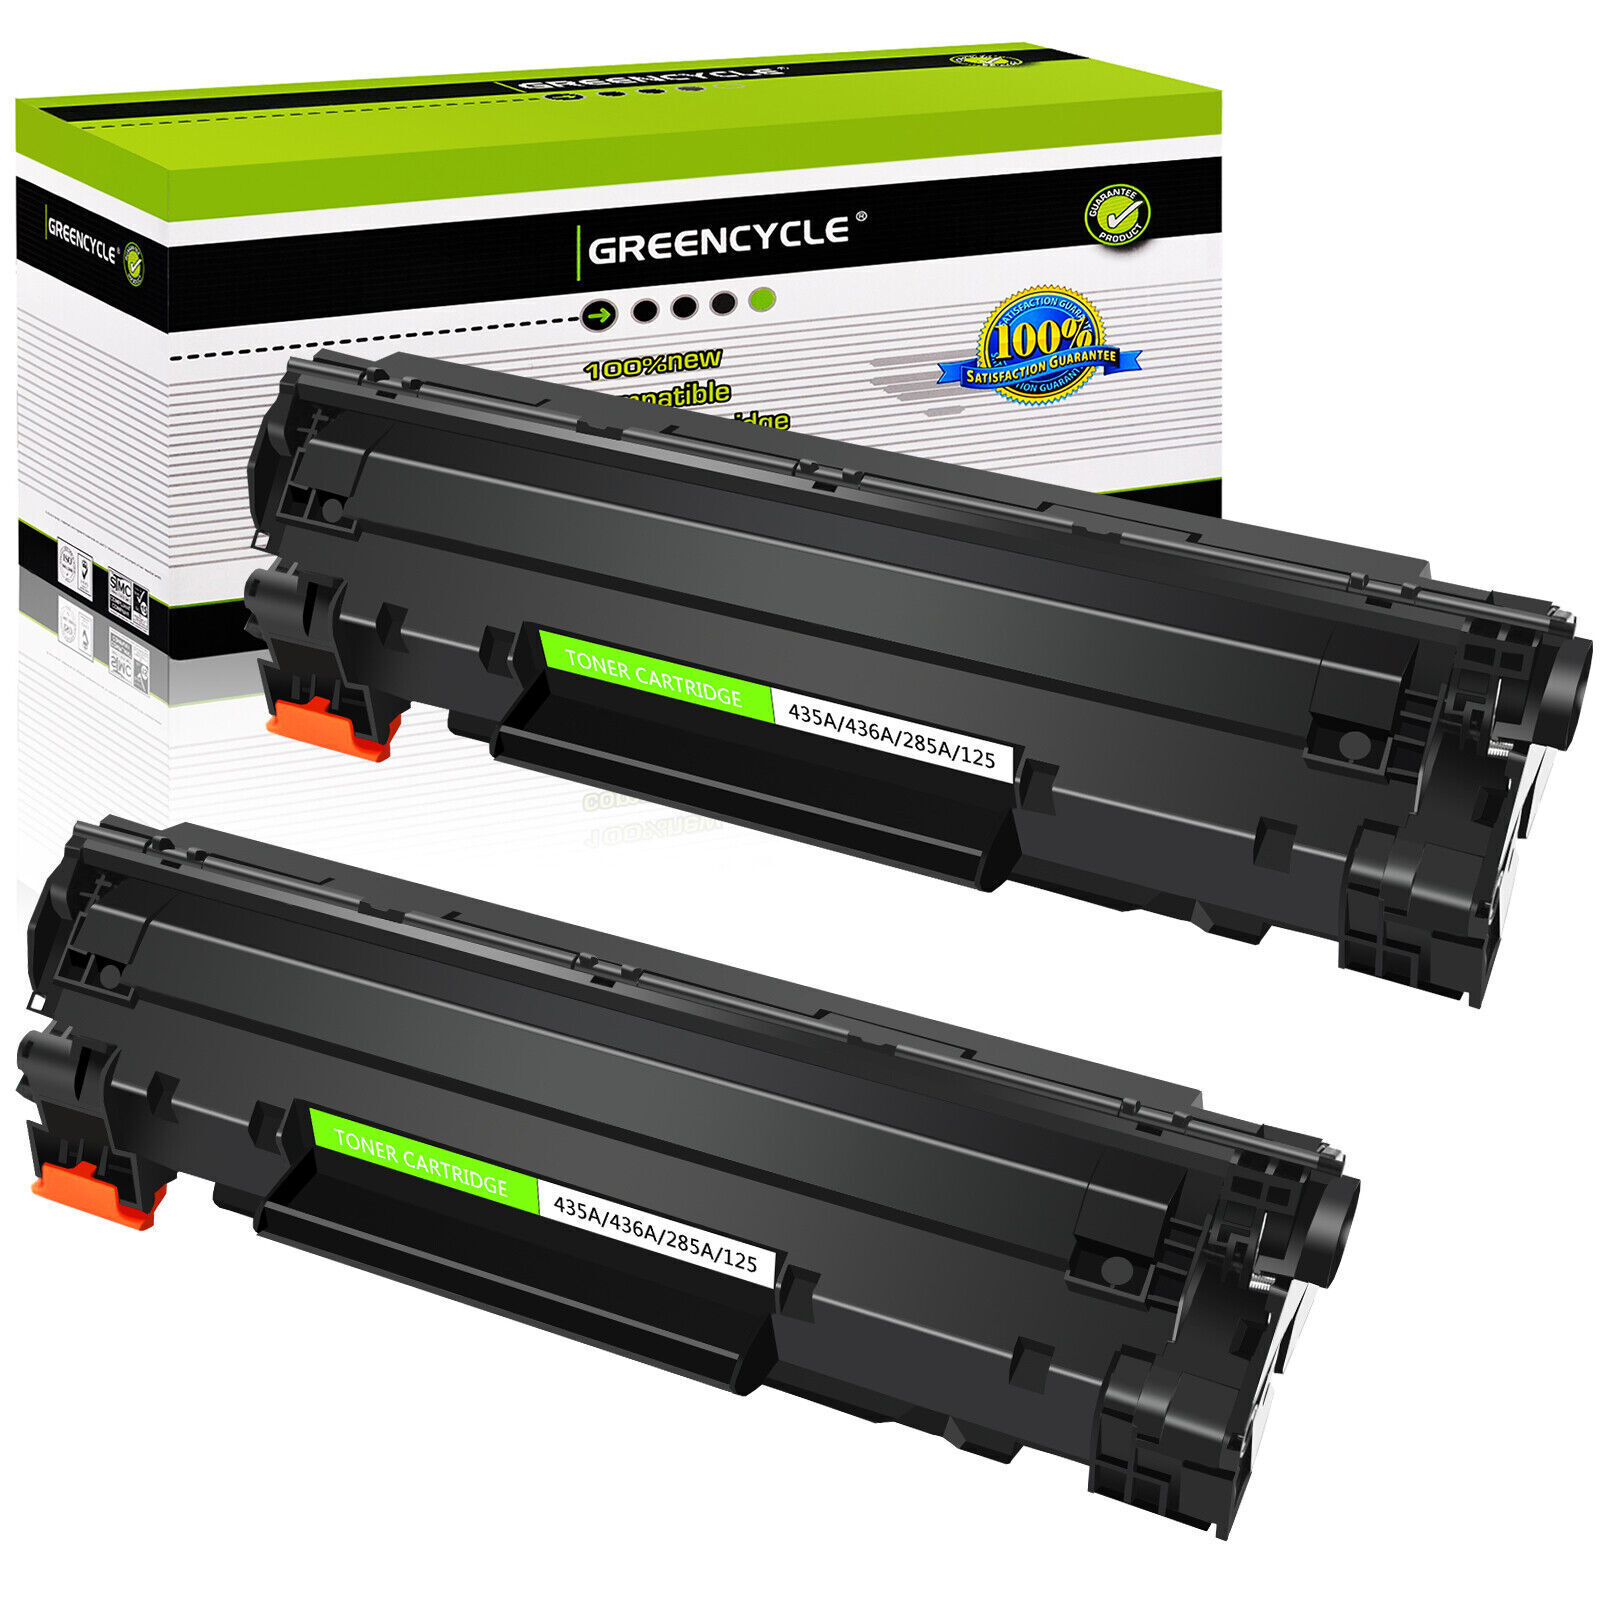 2PK greencycle Compatible Toner Cartridge for Canon 125 CRG125 imageCLASS MF3010